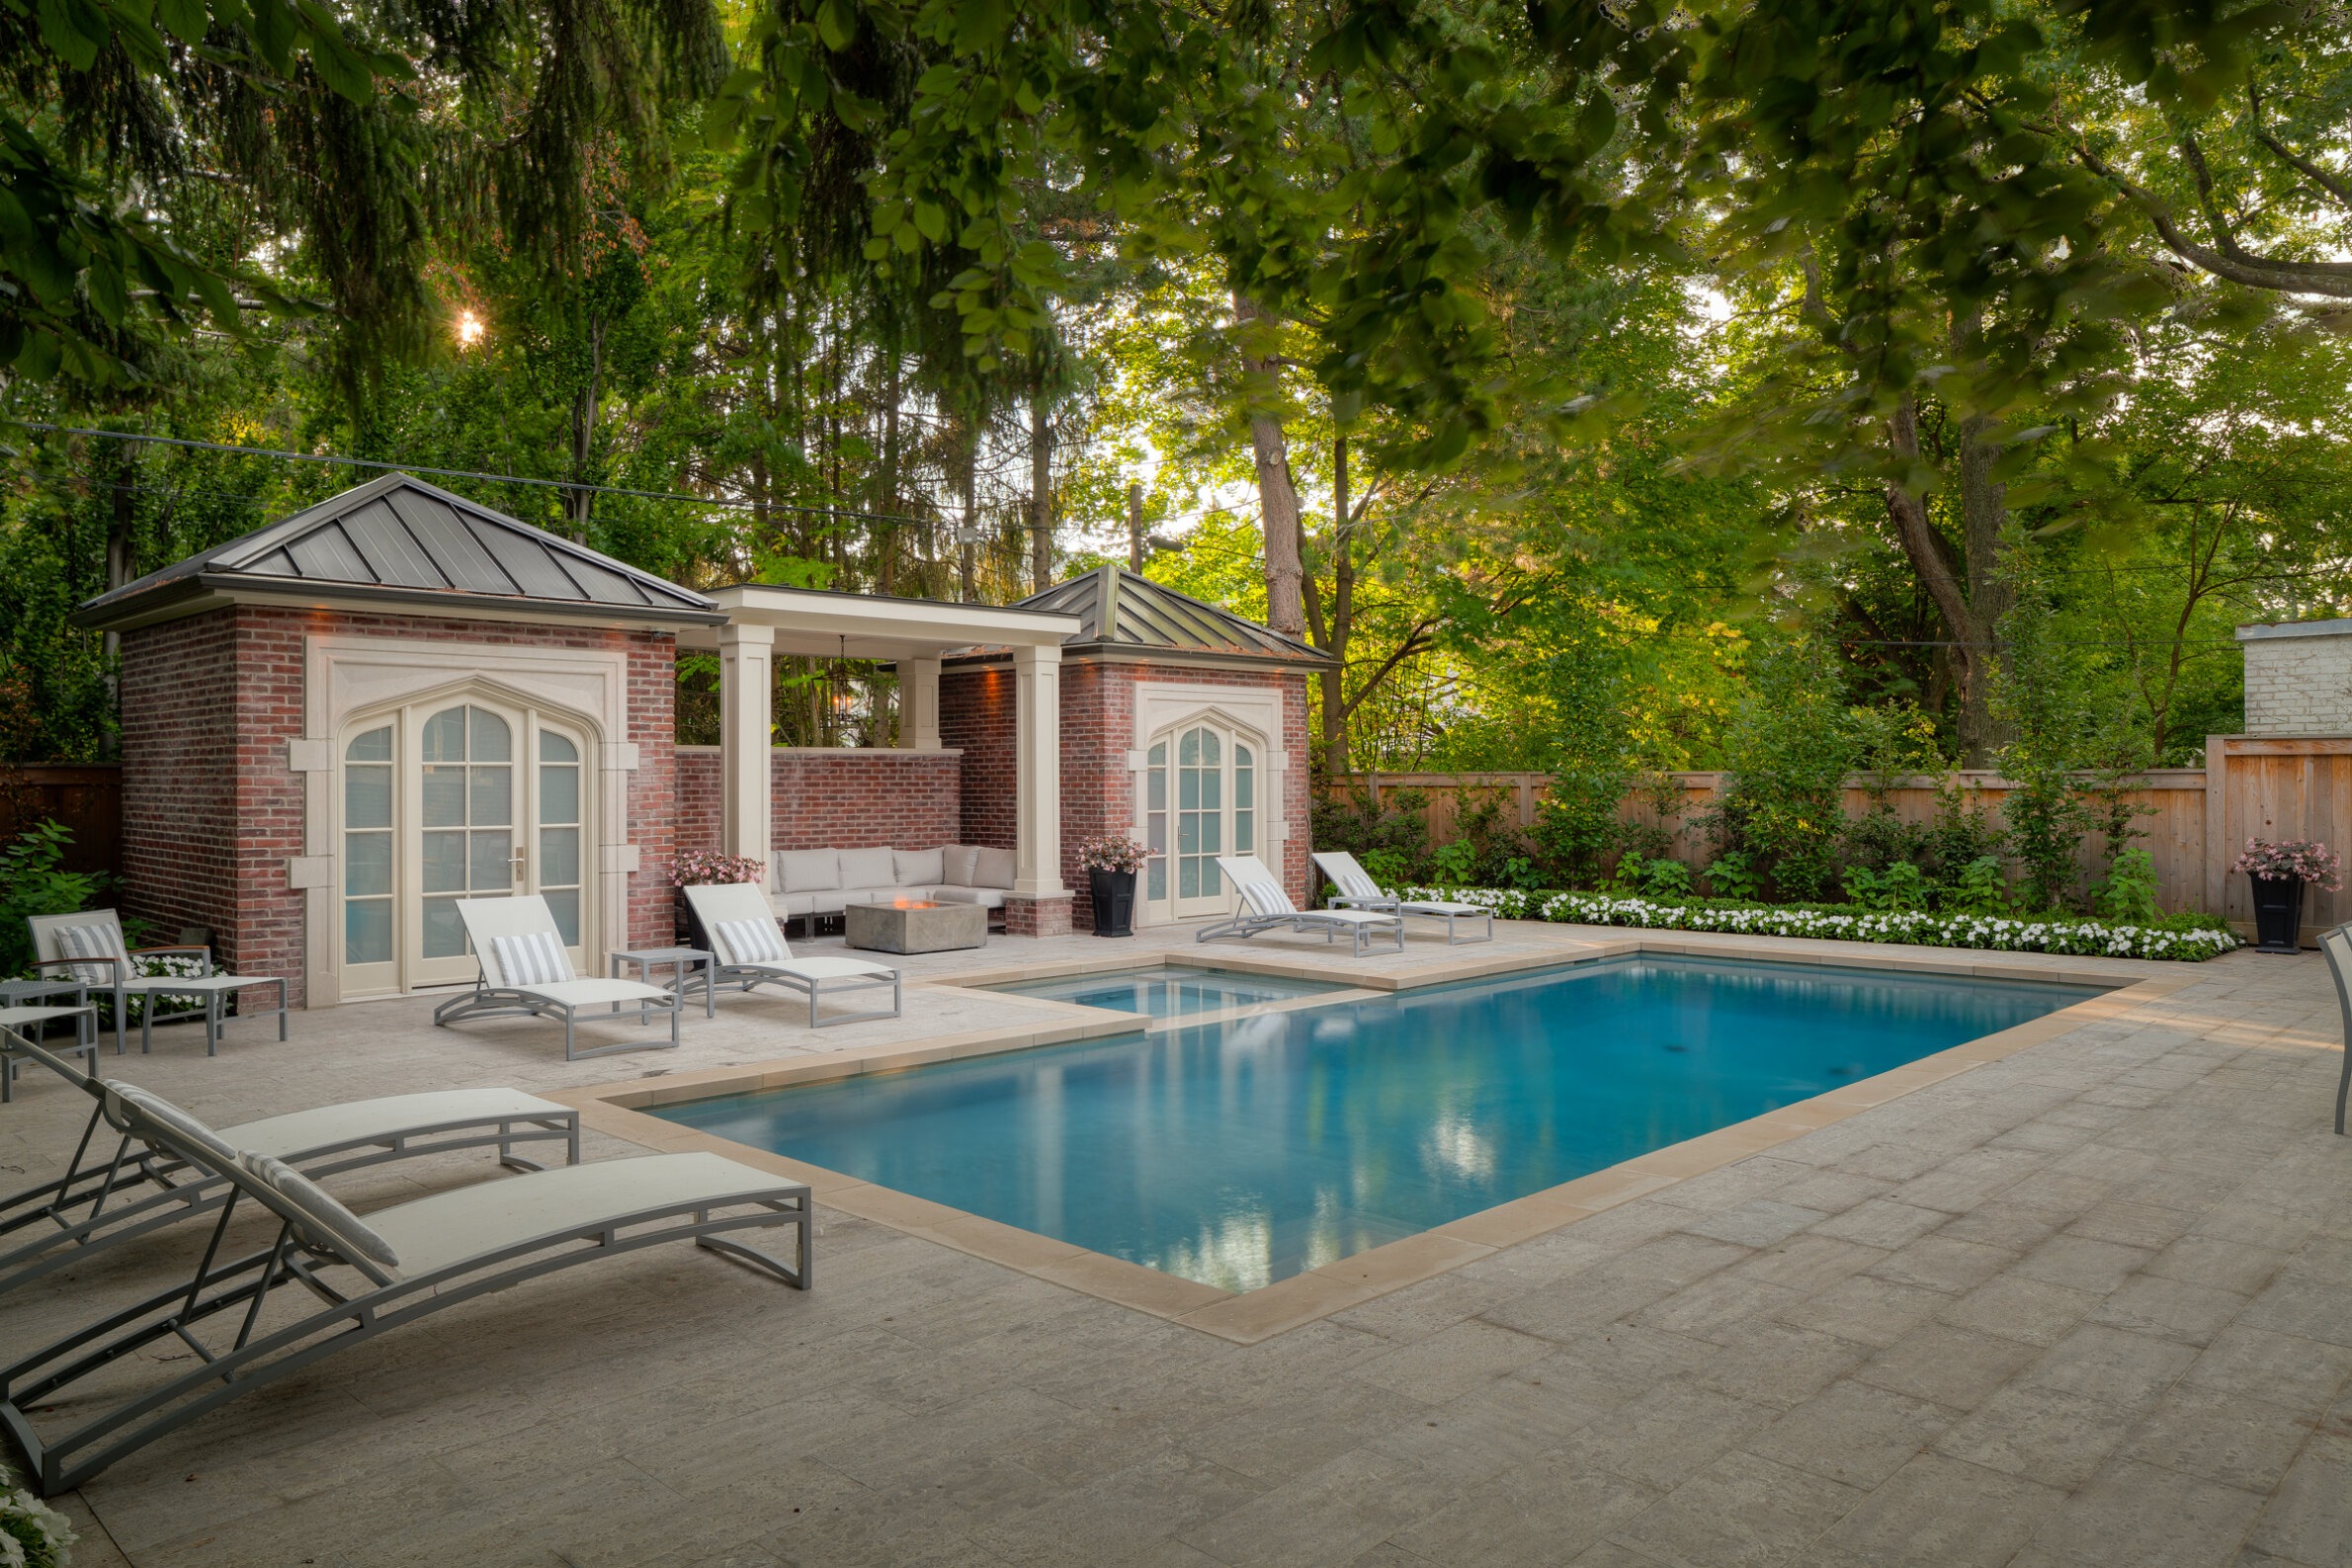 This image features an outdoor pool with loungers, surrounded by a lush garden, and adjacent to a building with a lounging area under a pergola.